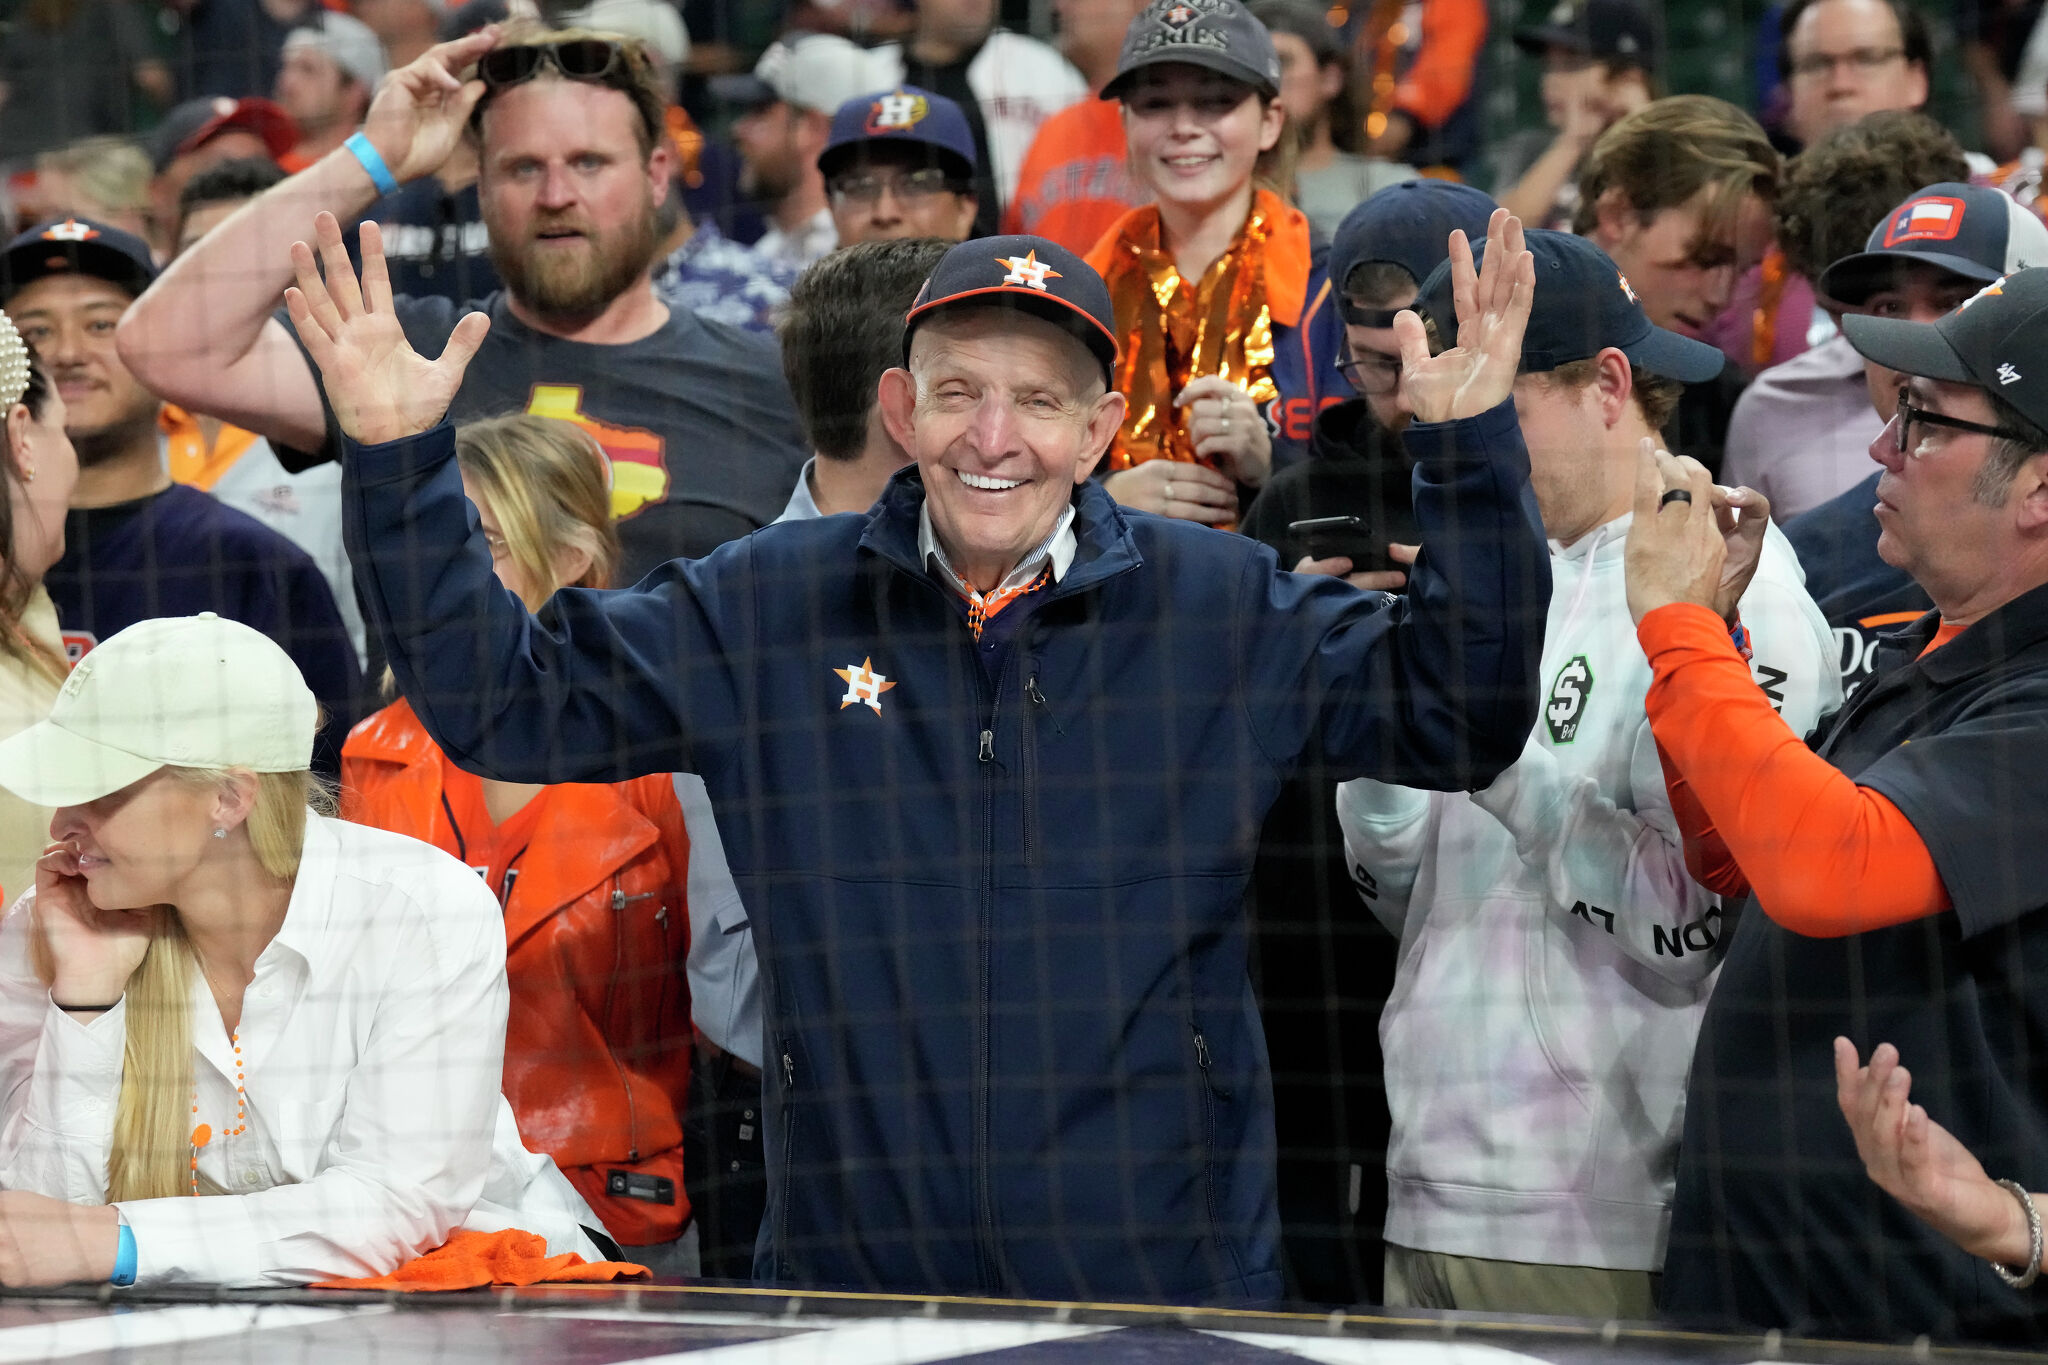 Mattress Mack relishes Astros World Series win and $75M payday